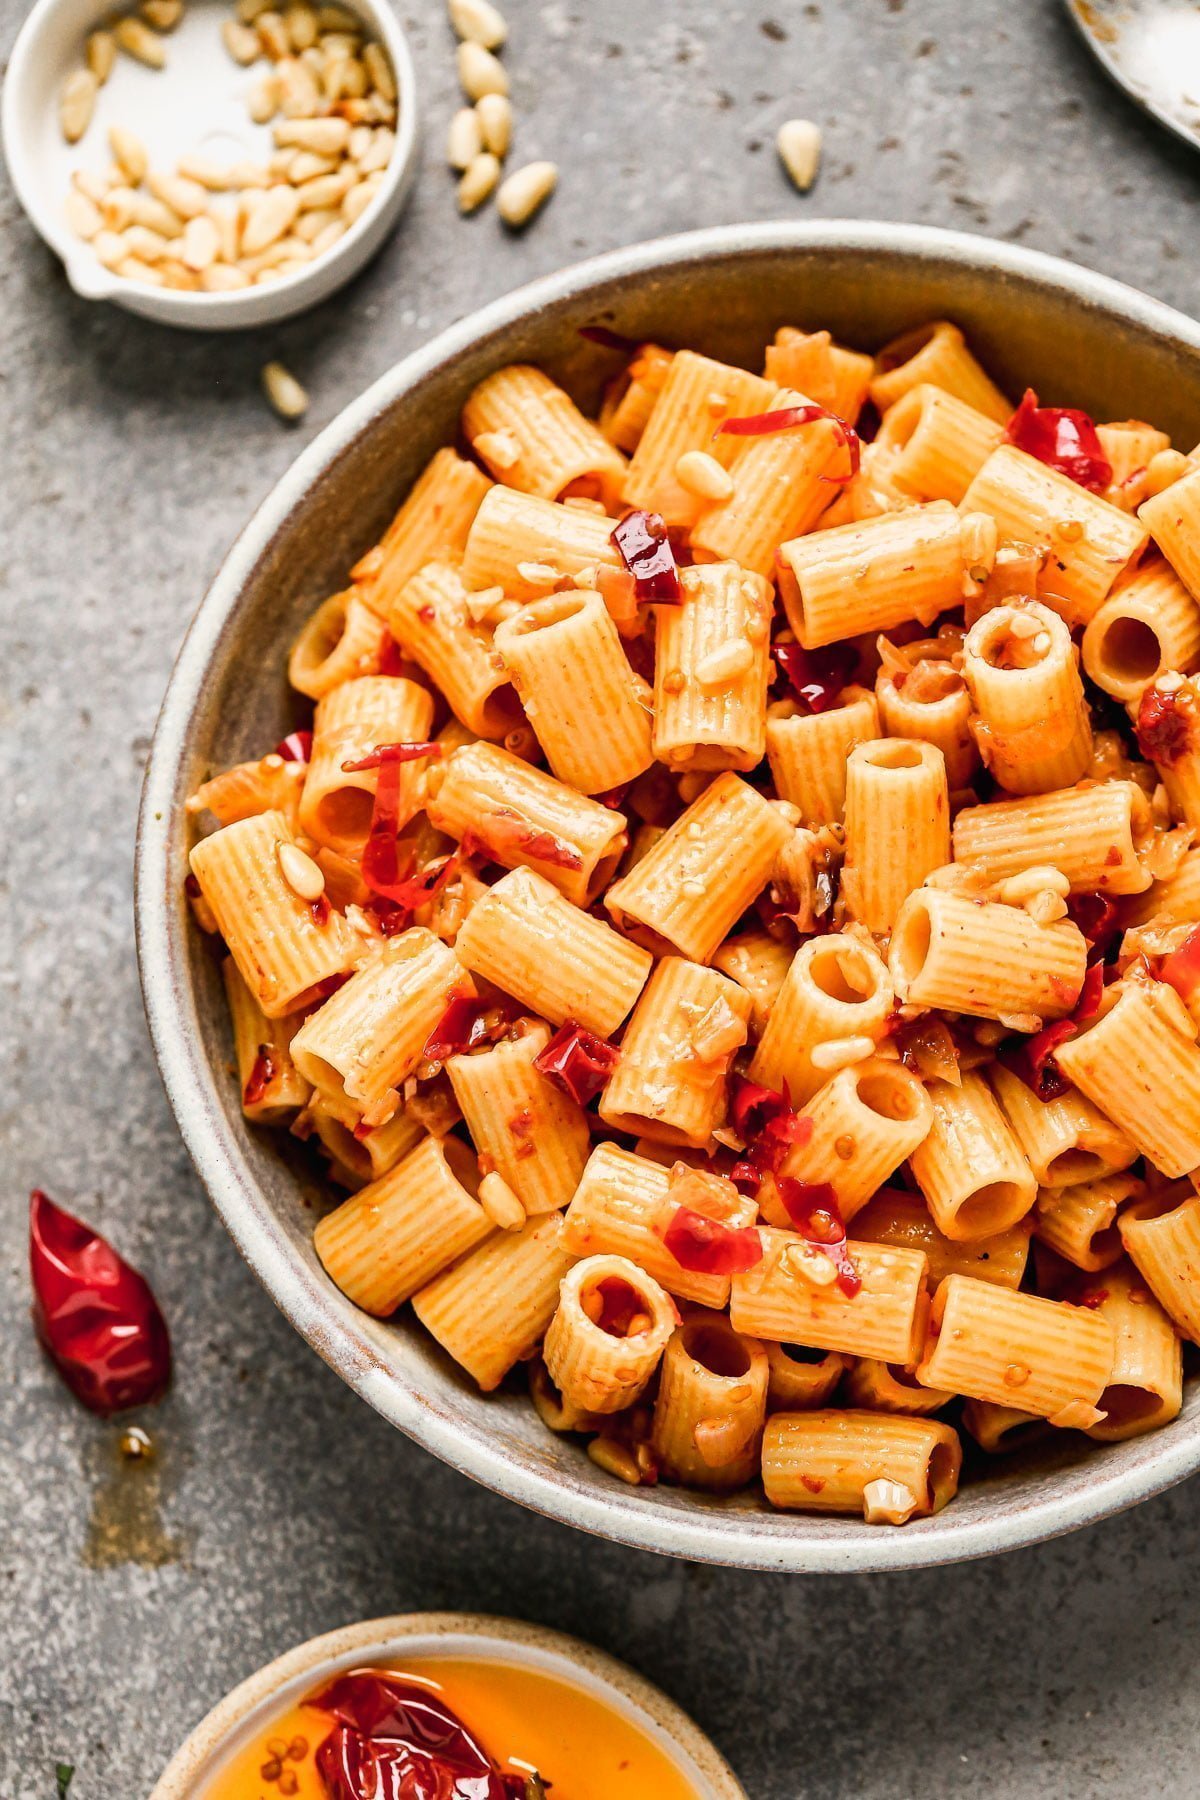 Calabrian Chili Pasta:&nbsp;This simple pasta requires just six ingredients and despite the minimal ingredient list, the flavor is next level with ultra spicy Calabrian chilis, nutty parmesan cheese, and a heavy hand of garlic.&nbsp;